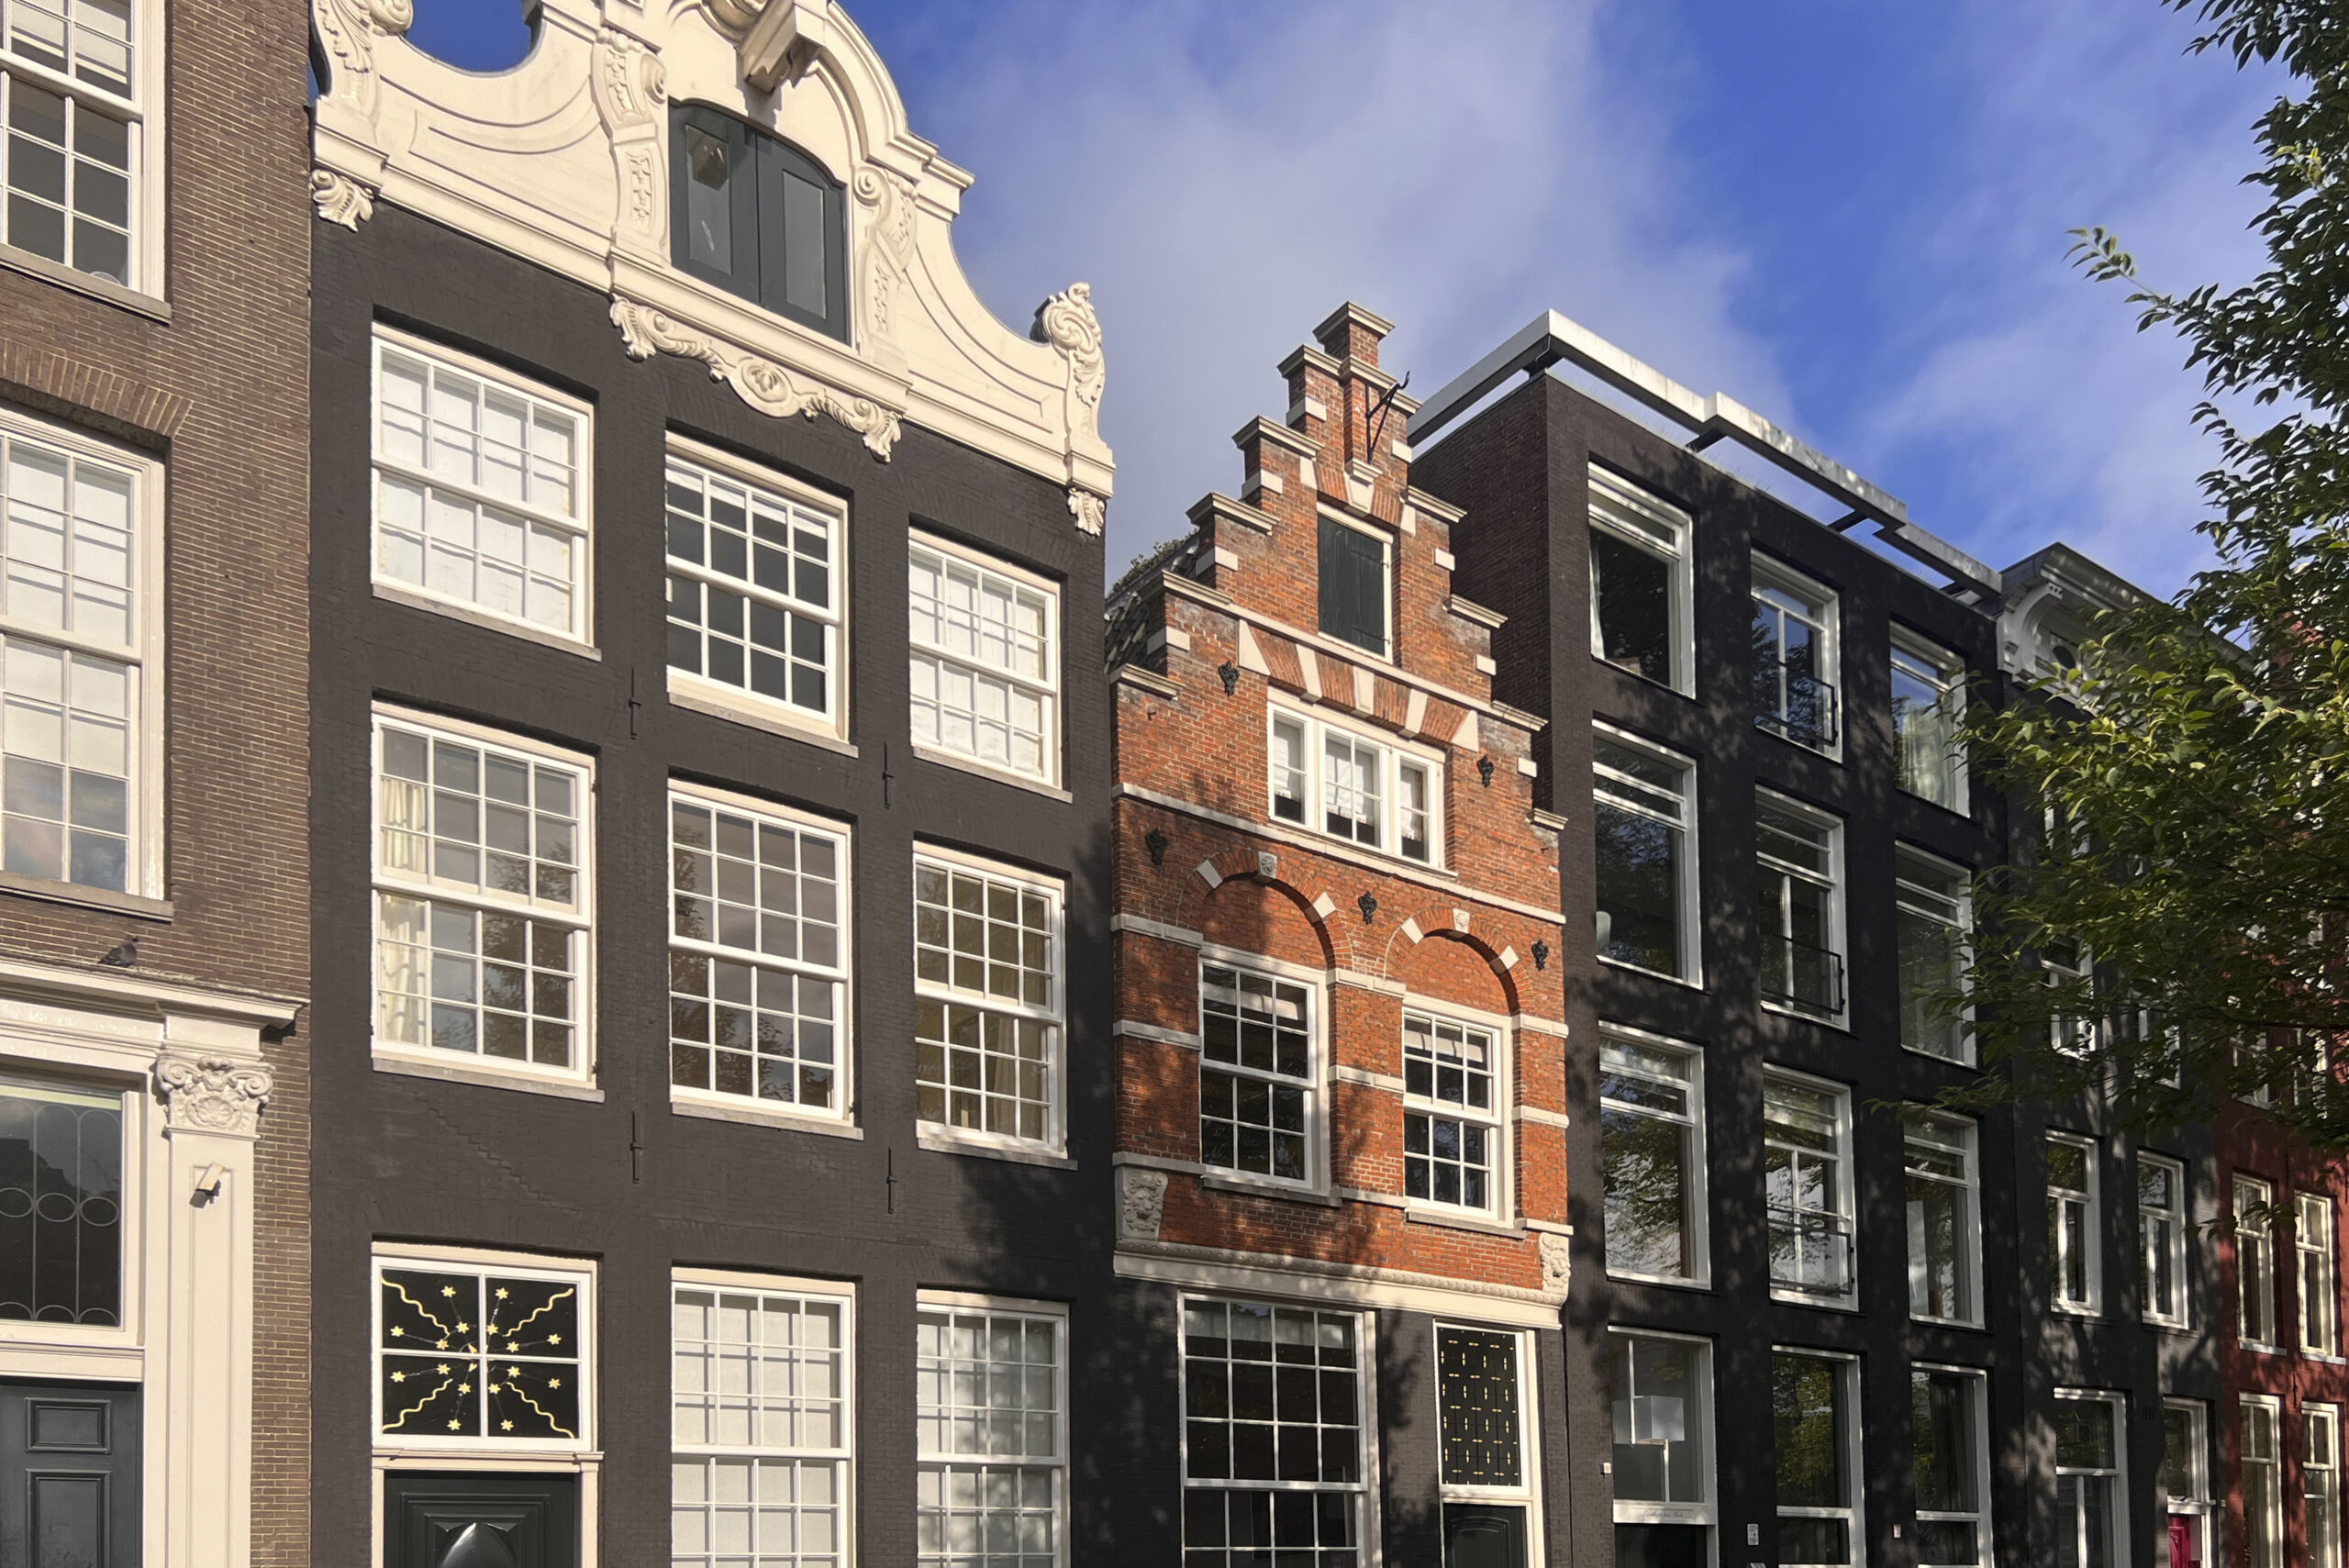 Featured image for “Herengracht 334 A & PP in Romeinsarmsteeg – LIVING IN FIVE CENTURIES”